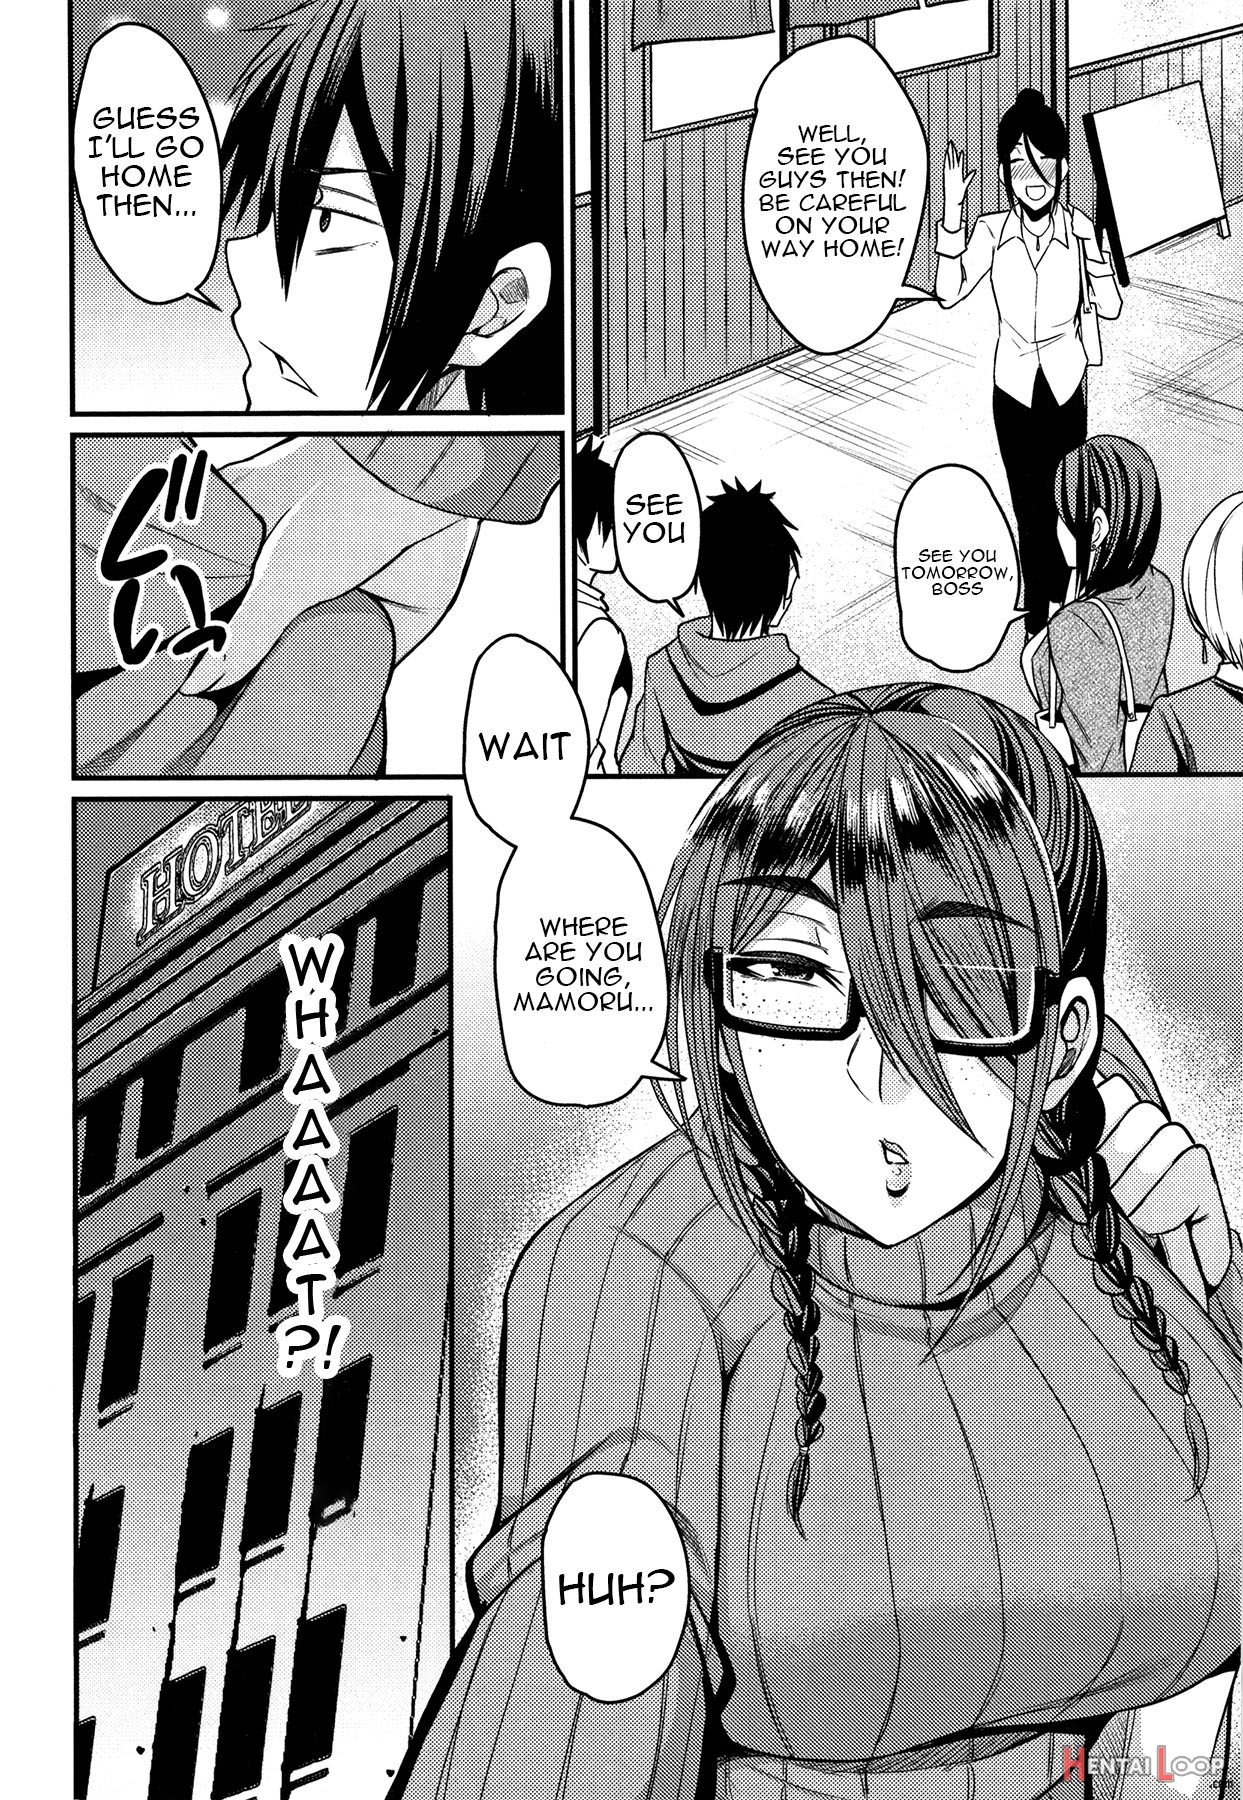 Wife Breast Temptation Ch. 1-2 page 9